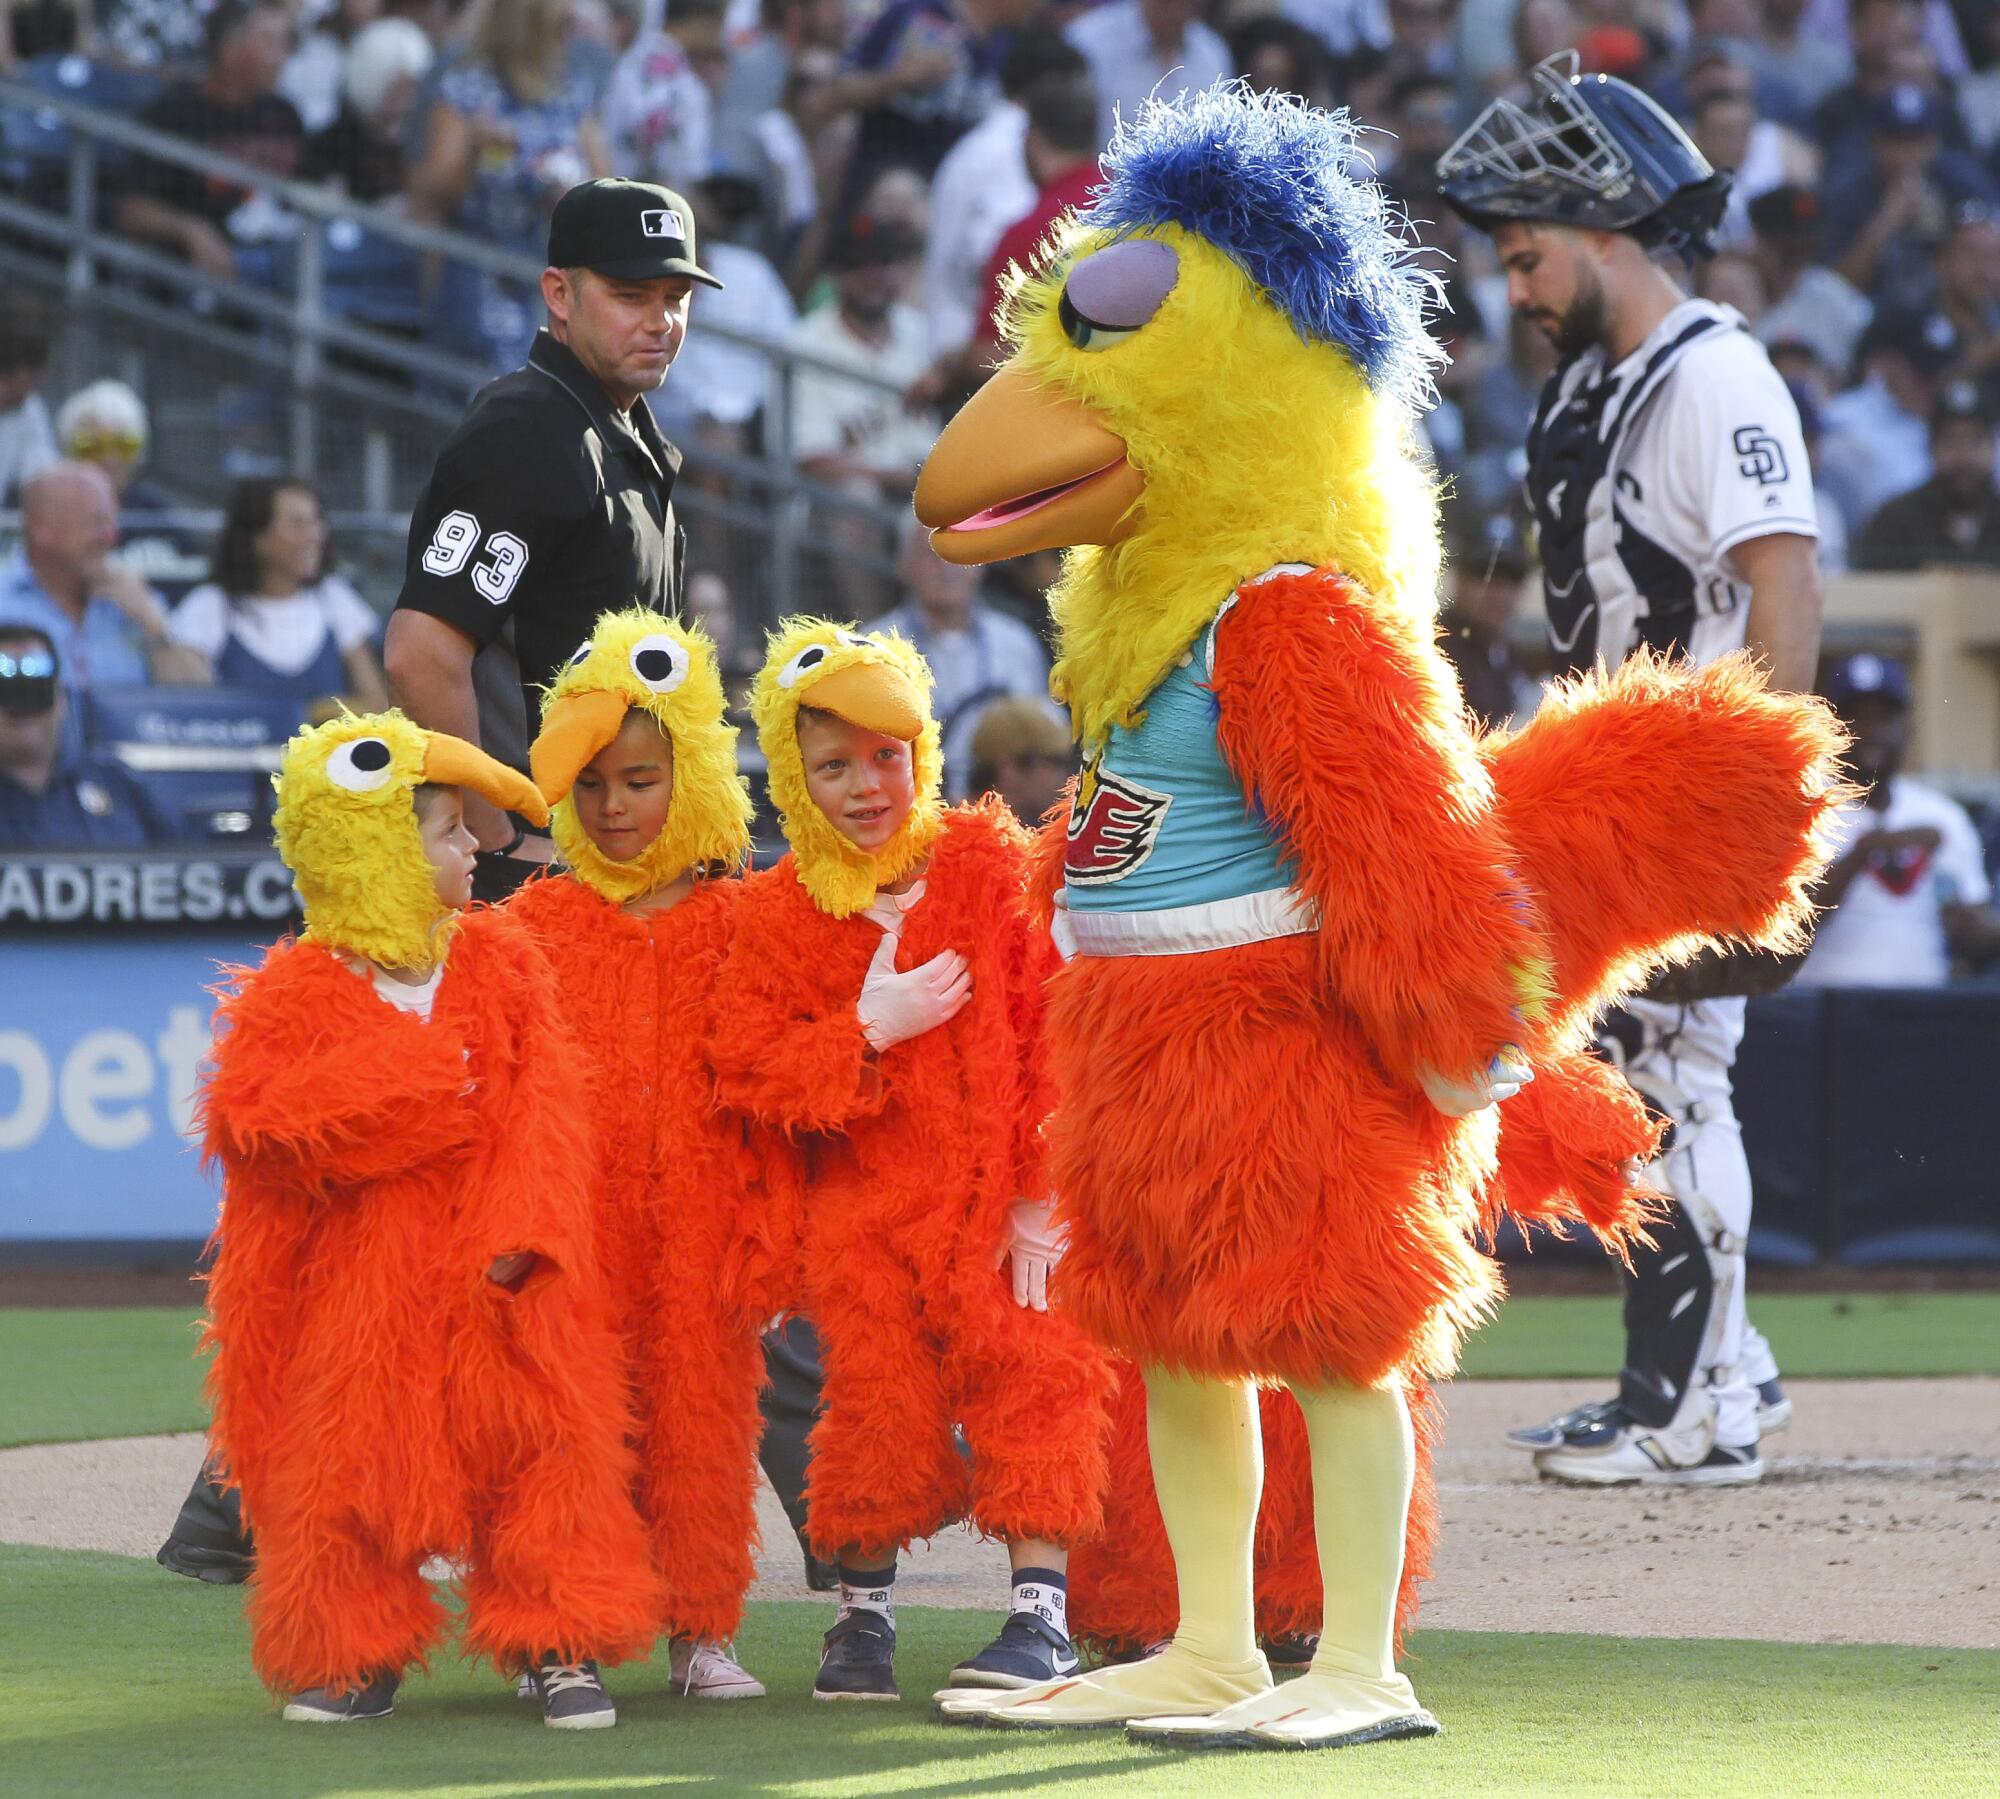 The Chicken leads a group of children dressed as baby chicks past catcher Austin Hedges during 2019 appearance at Petco Park.